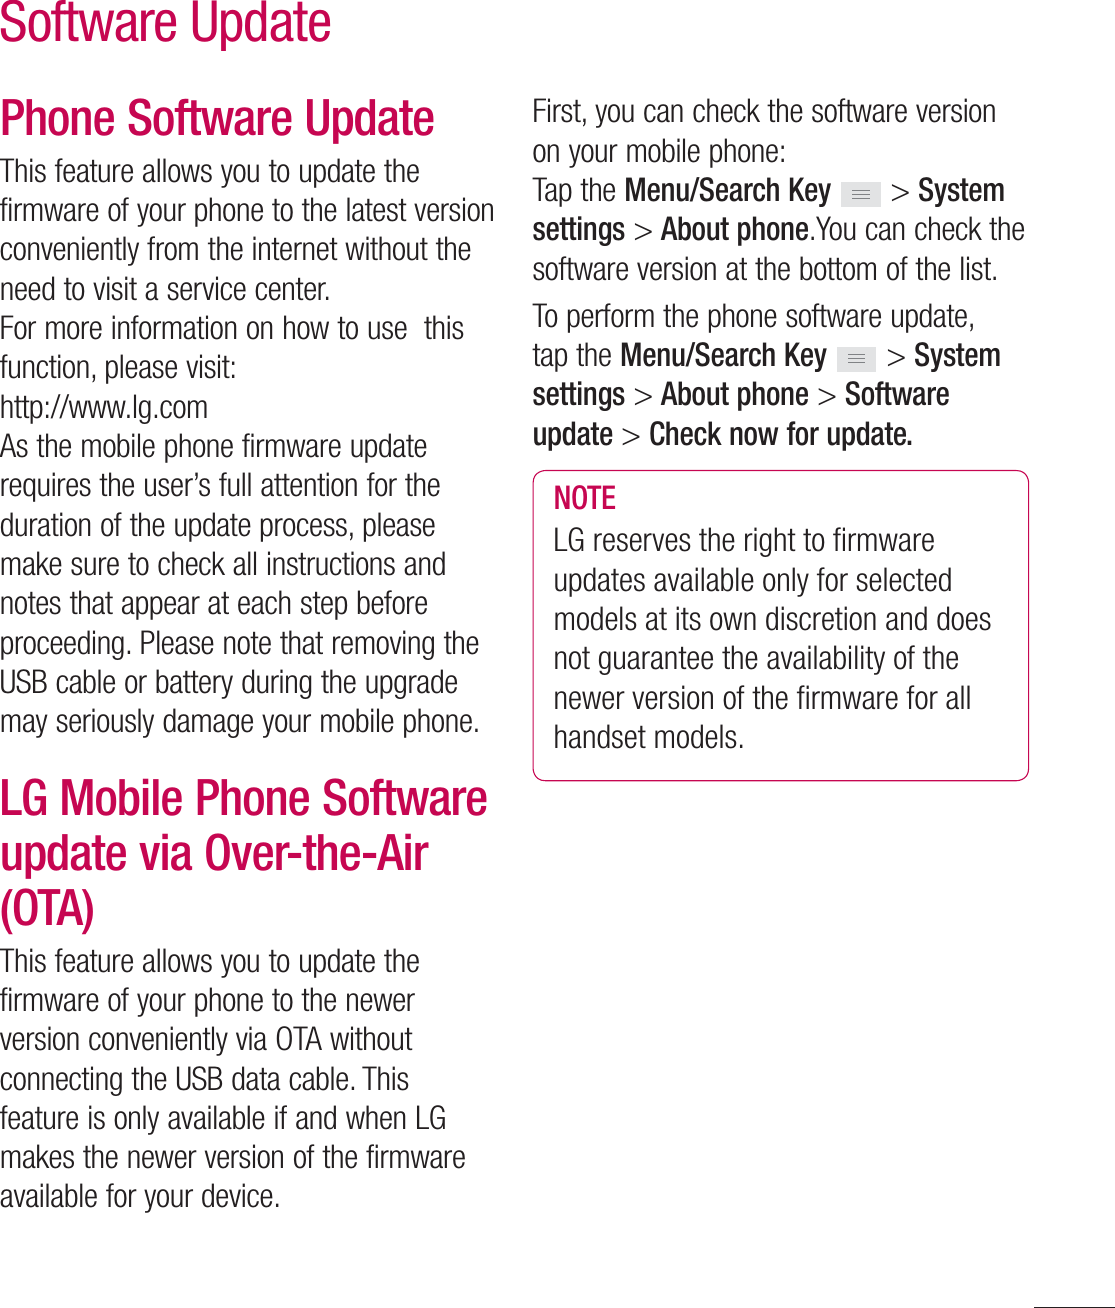 117Phone Software UpdateThis feature allows you to update the firmware of your phone to the latest version conveniently from the internet without the need to visit a service center. For more information on how to use  this function, please visit:http://www.lg.comAs the mobile phone firmware update requires the user’s full attention for the duration of the update process, please make sure to check all instructions and notes that appear at each step before proceeding. Please note that removing the USB cable or battery during the upgrade may seriously damage your mobile phone.LG Mobile Phone Software update via Over-the-Air (OTA)This feature allows you to update the firmware of your phone to the newer version conveniently via OTA without connecting the USB data cable. This feature is only available if and when LG makes the newer version of the firmware available for your device.  First, you can check the software version on your mobile phone:Tap the Menu/Search Key  &gt; System settings &gt; About phone.You can check the software version at the bottom of the list.To perform the phone software update, tap the Menu/Search Key  &gt; System settings &gt; About phone &gt; Software update &gt; Check now for update.NOTELG reserves the right to ﬁ rmware updates available only for selected models at its own discretion and does not guarantee the availability of the newer version of the ﬁ rmware for all handset models.Software Update